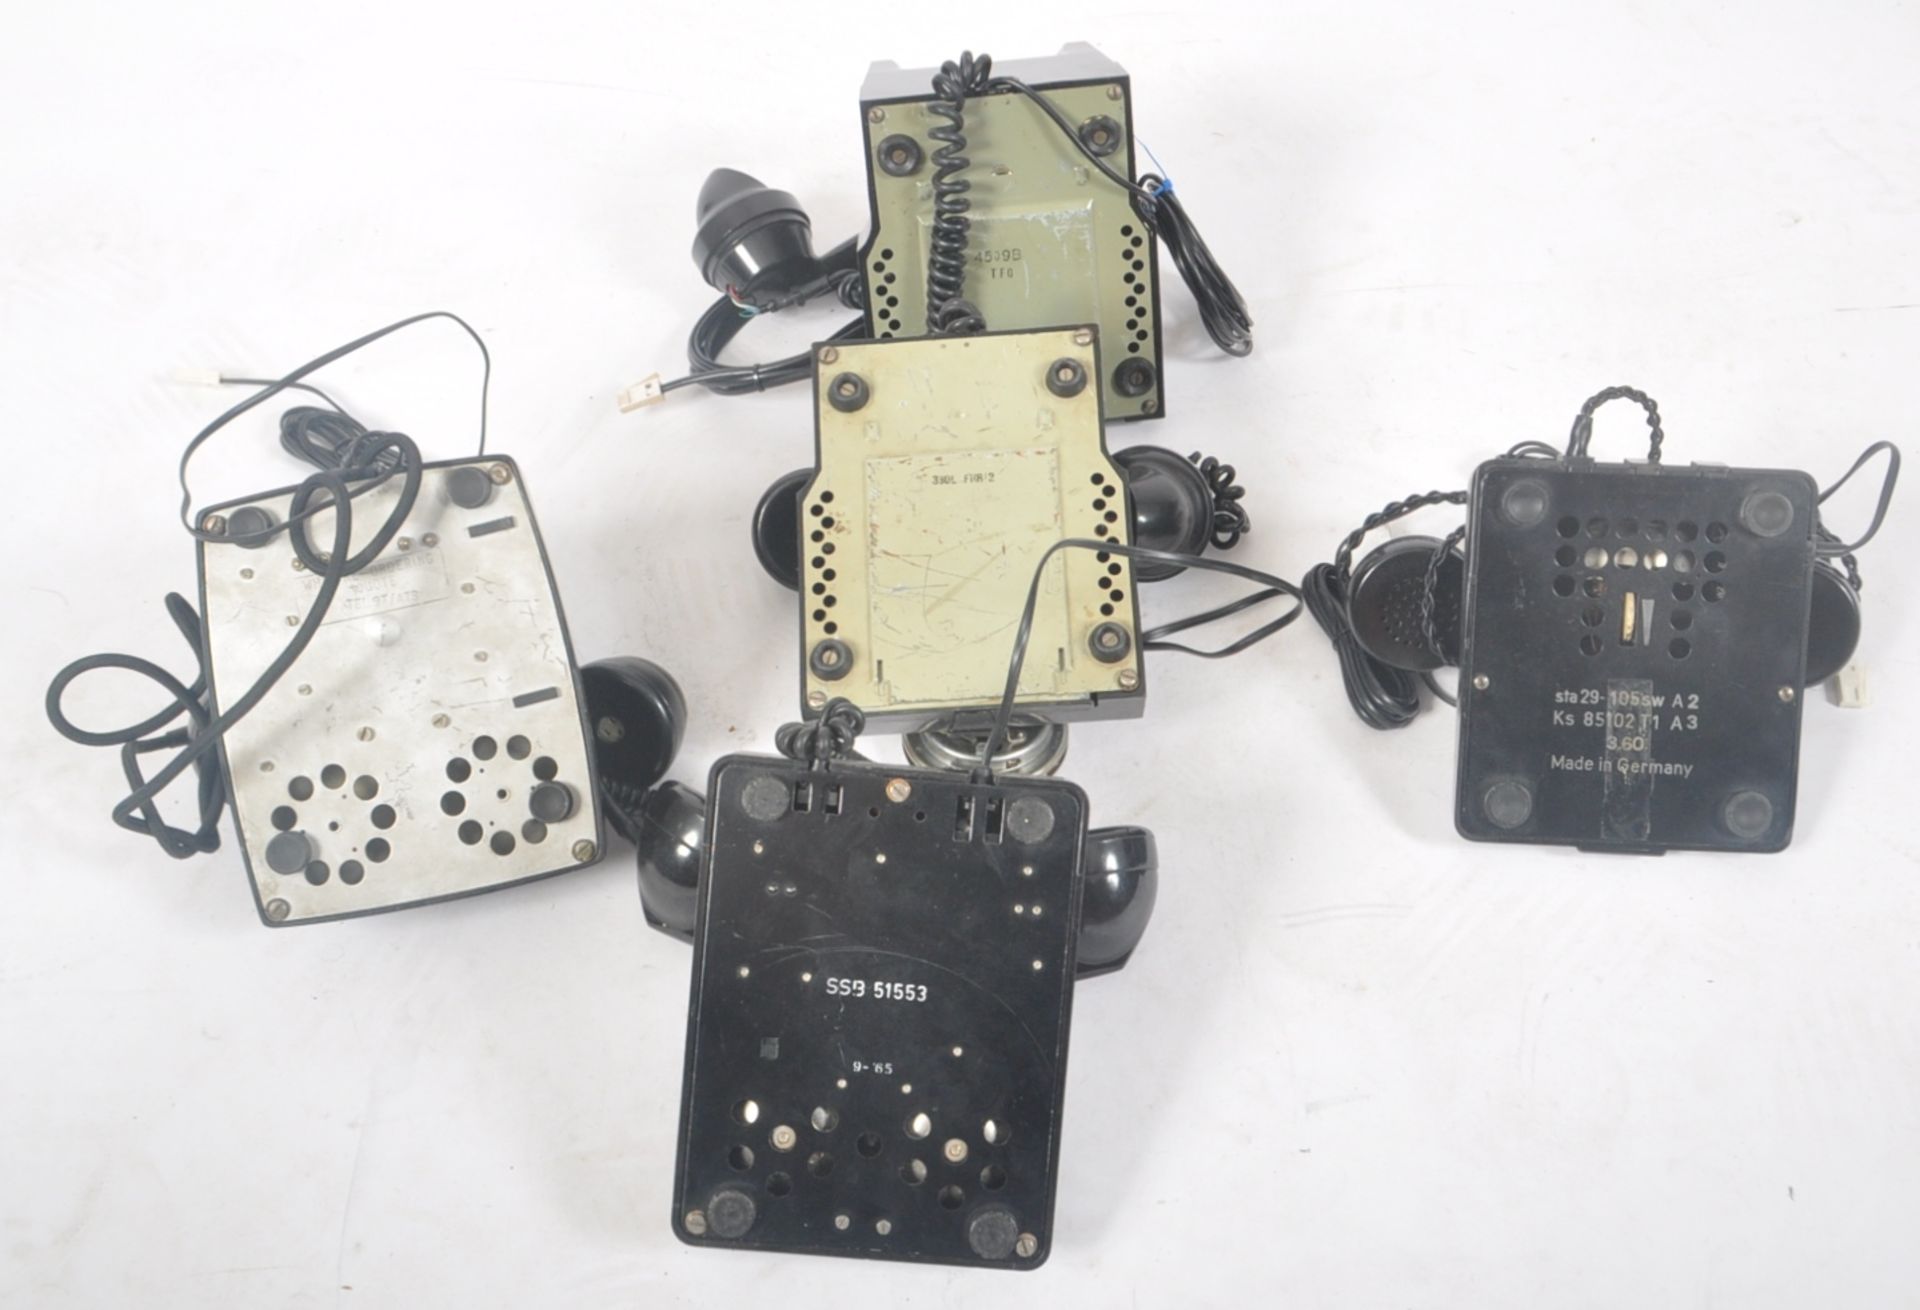 COLLECTION OF FIVE BLACK BAKELITE ROTARY TELEPHONES - Image 6 of 8